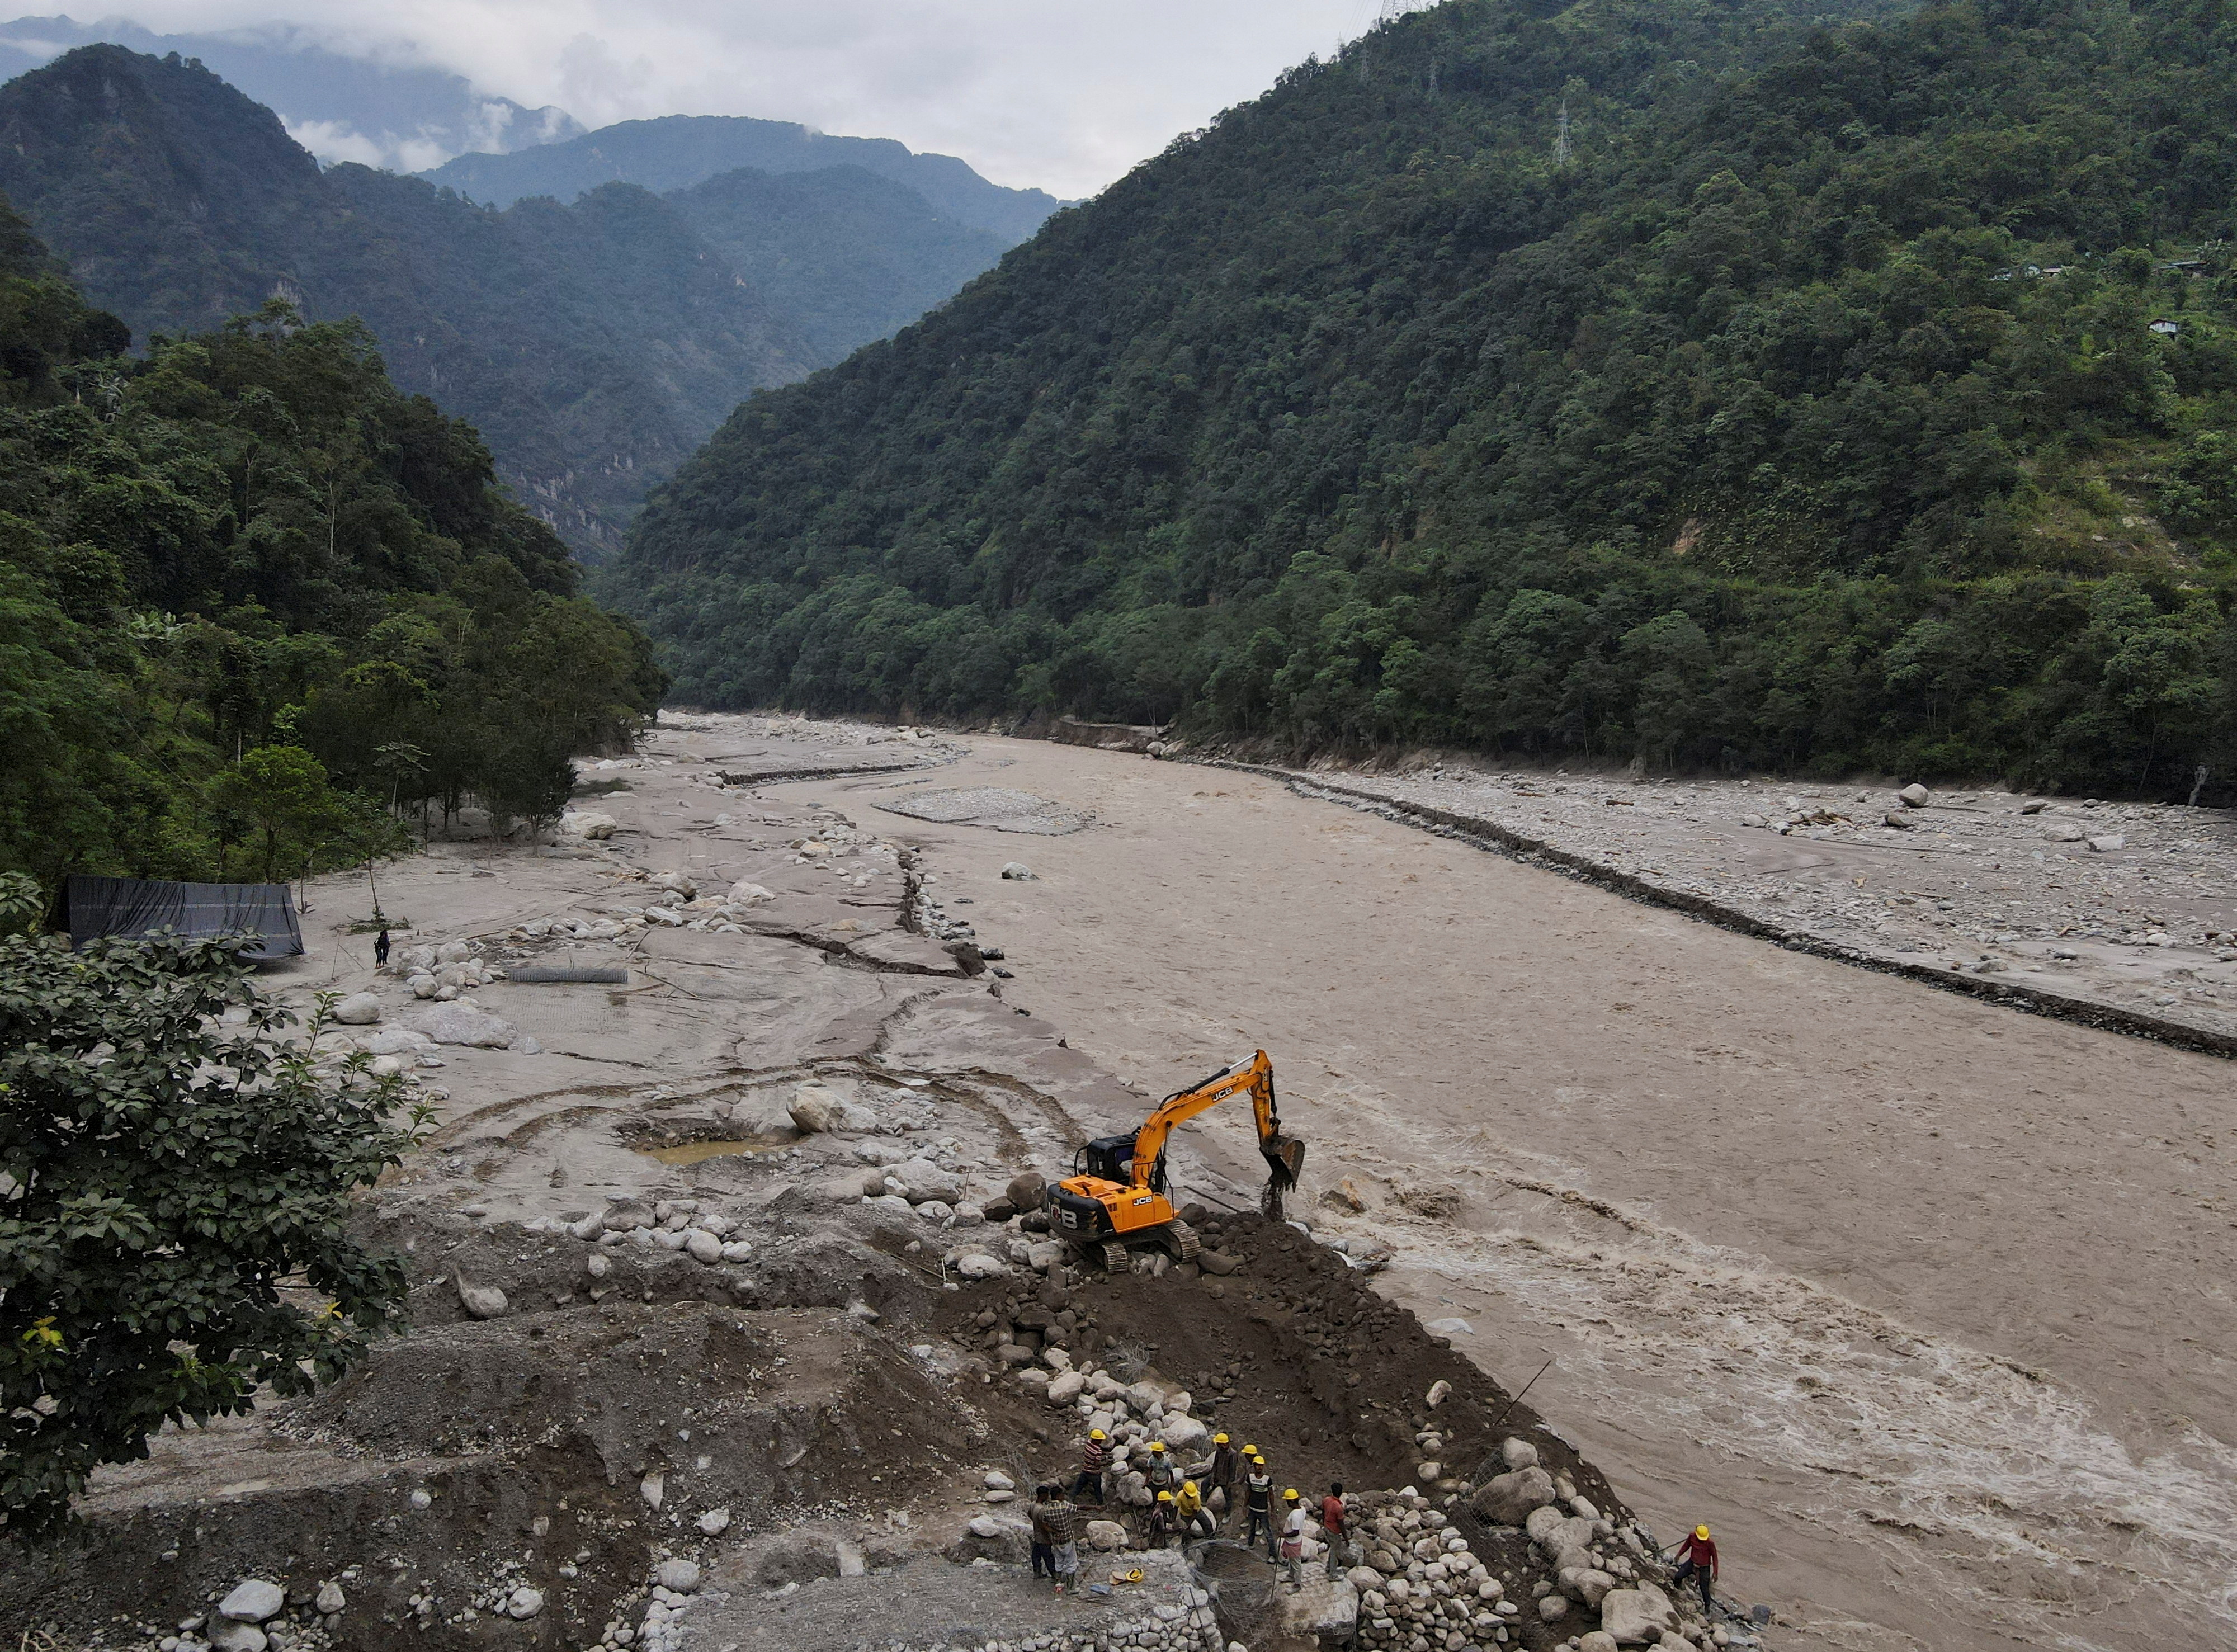 People and an excavator worki along the Teesta river to create a road to Dzongu village after flash floods washed away a bridge at Sangkalang, Sikkim, India